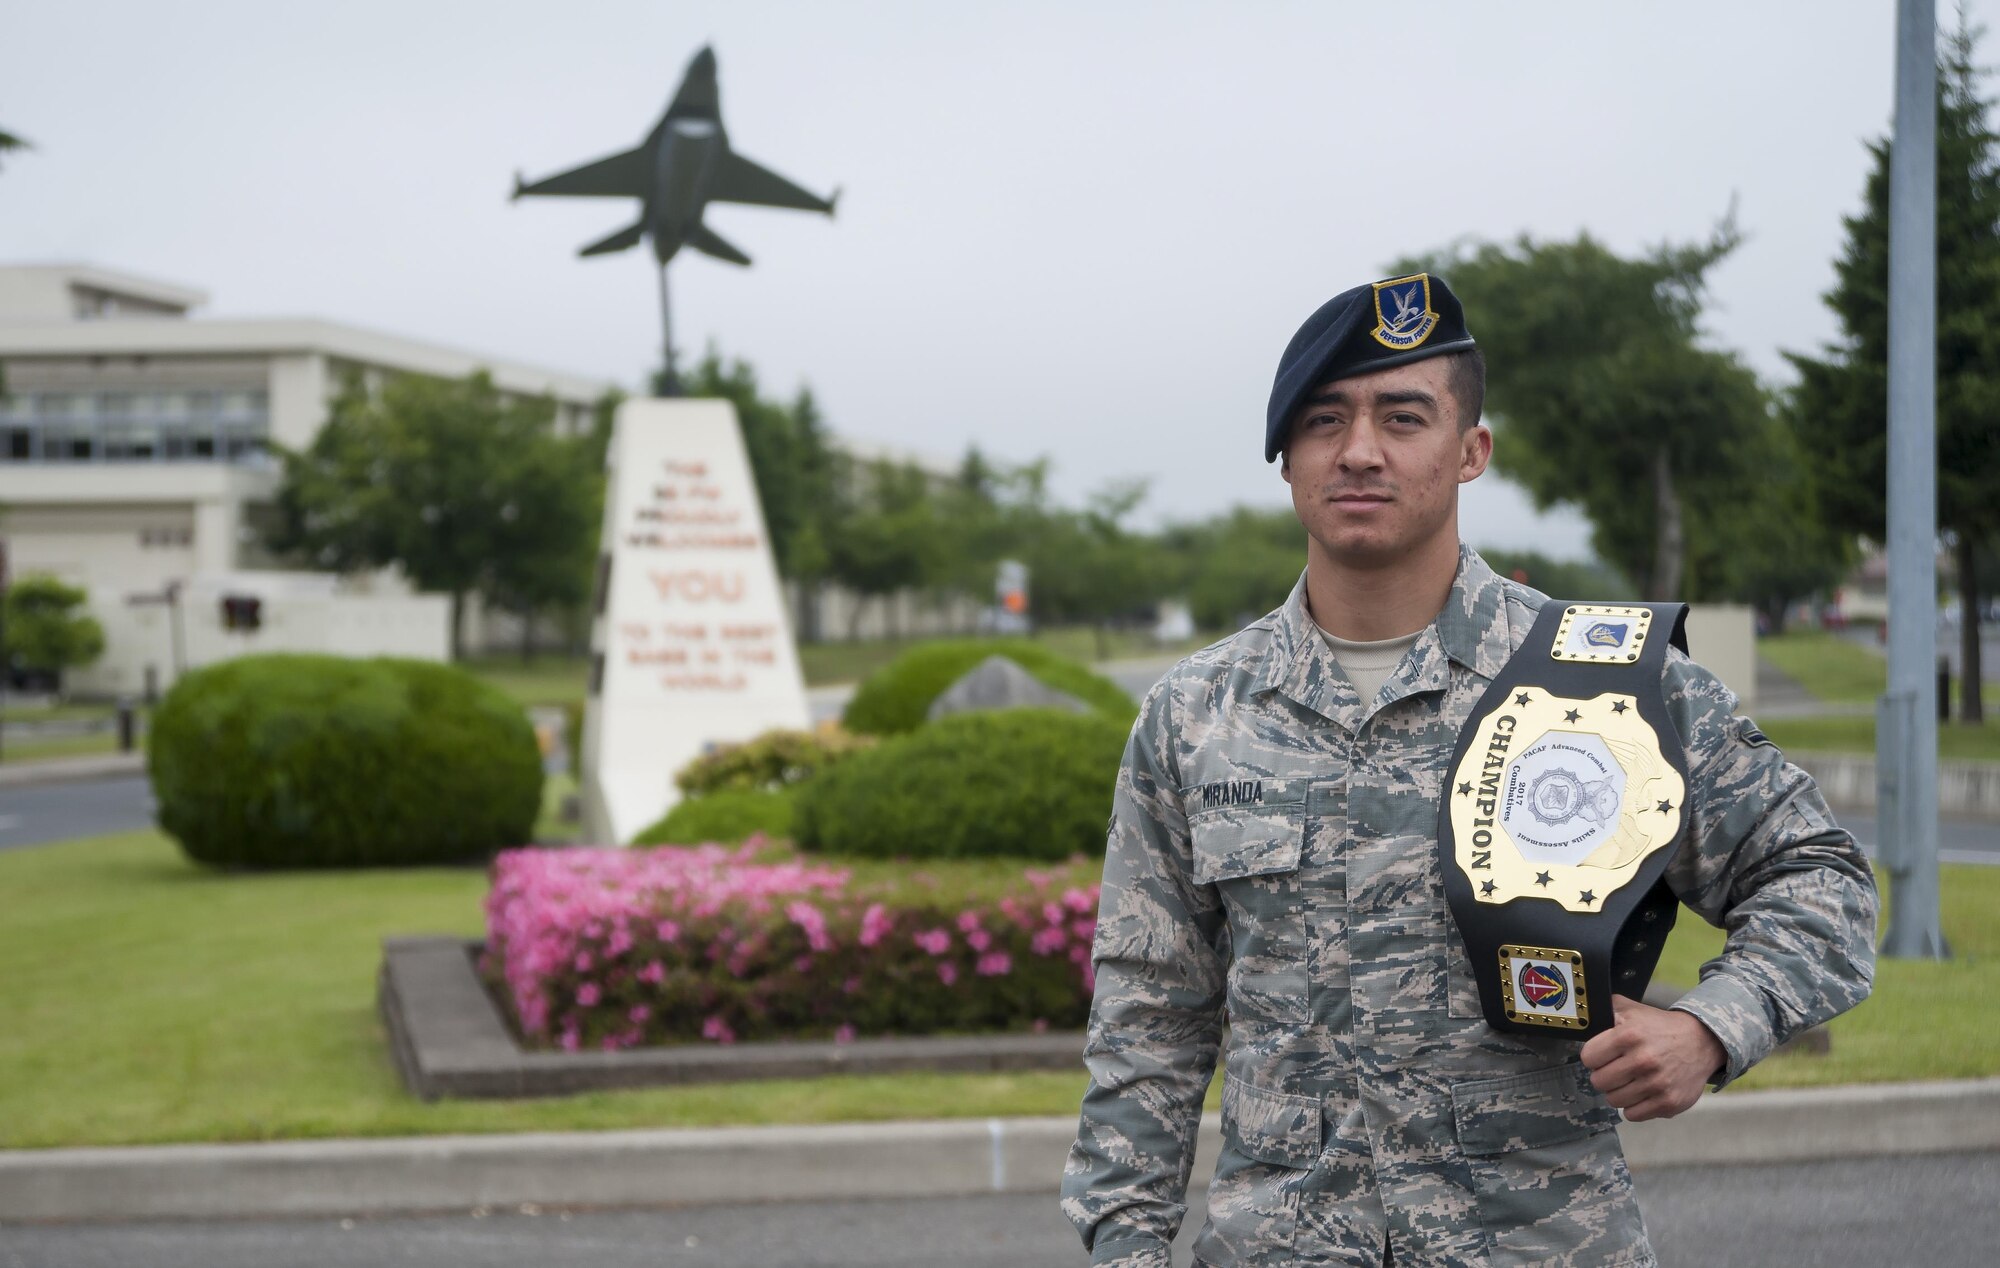 U.S. Air Force Airman Sergio Miranda, a 35th Security Forces Squadron entry controller, pauses for a photo at Misawa Air Base, Japan, June 16, 2017. Miranda won the belt and title of the 2017 Combatives Champion of the second annual Security Forces Advanced Combat Skills Assessment held at the Security Forces Regional Training Center at Andersen Air Force Base, Guam, June 4 to 9. The combative portion was the only individual event based out of five events. (U.S. Air Force photo by Staff Sgt. Melanie Hutto)